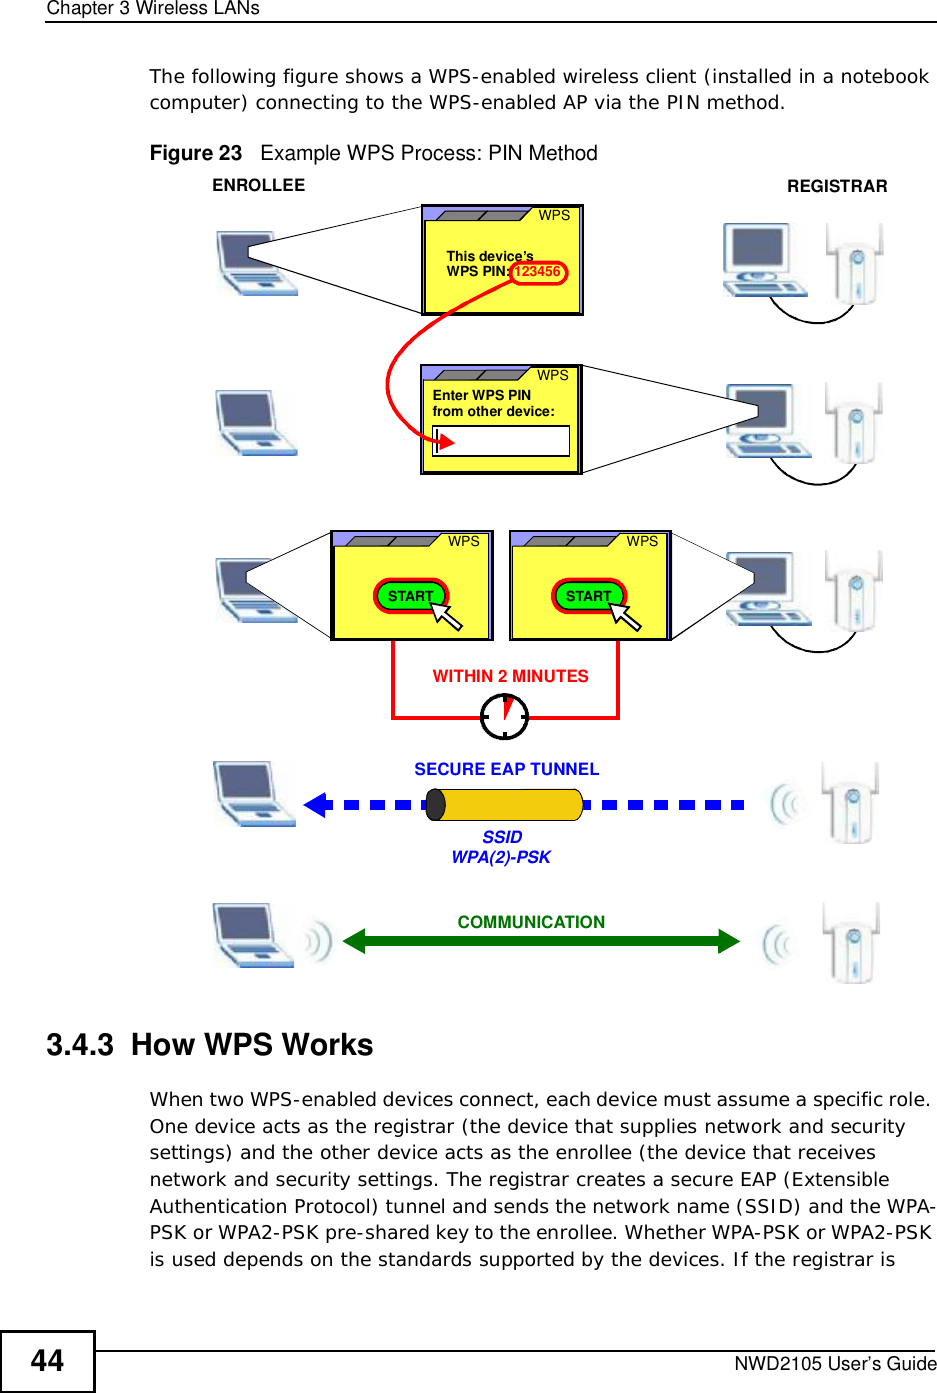 Chapter 3Wireless LANsNWD2105 User’s Guide44The following figure shows a WPS-enabled wireless client (installed in a notebook computer) connecting to the WPS-enabled AP via the PIN method.Figure 23   Example WPS Process: PIN Method3.4.3  How WPS WorksWhen two WPS-enabled devices connect, each device must assume a specific role. One device acts as the registrar (the device that supplies network and security settings) and the other device acts as the enrollee (the device that receives network and security settings. The registrar creates a secure EAP (Extensible Authentication Protocol) tunnel and sends the network name (SSID) and the WPA-PSK or WPA2-PSK pre-shared key to the enrollee. Whether WPA-PSK or WPA2-PSK is used depends on the standards supported by the devices. If the registrar is ENROLLEESECURE EAP TUNNELSSIDWPA(2)-PSKWITHIN 2 MINUTESCOMMUNICATIONThis device’s WPSEnter WPS PIN  WPSfrom other device: WPS PIN: 123456WPSSTARTWPSSTARTREGISTRAR